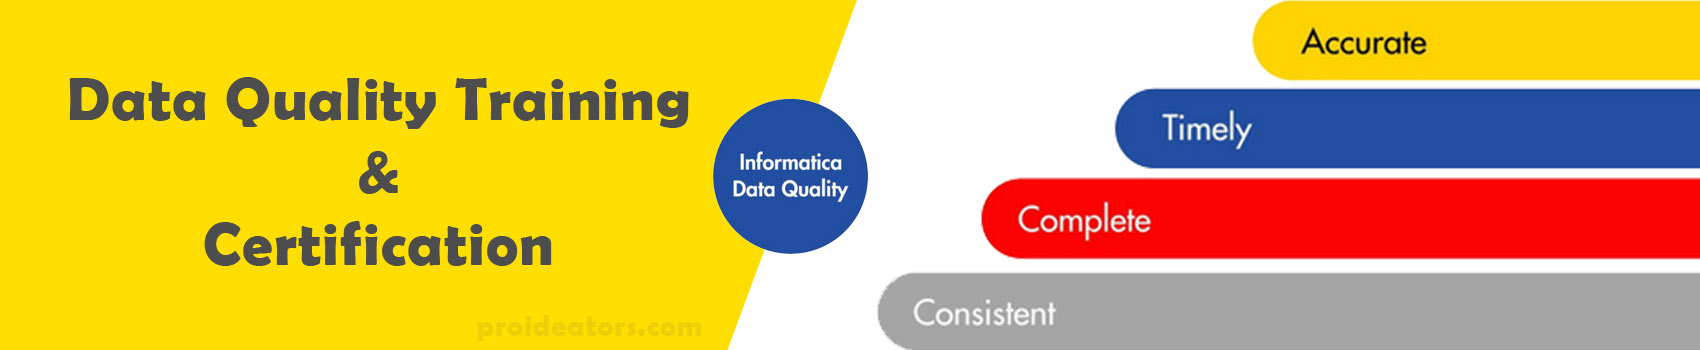 Informatica Data Quality Training and Certification